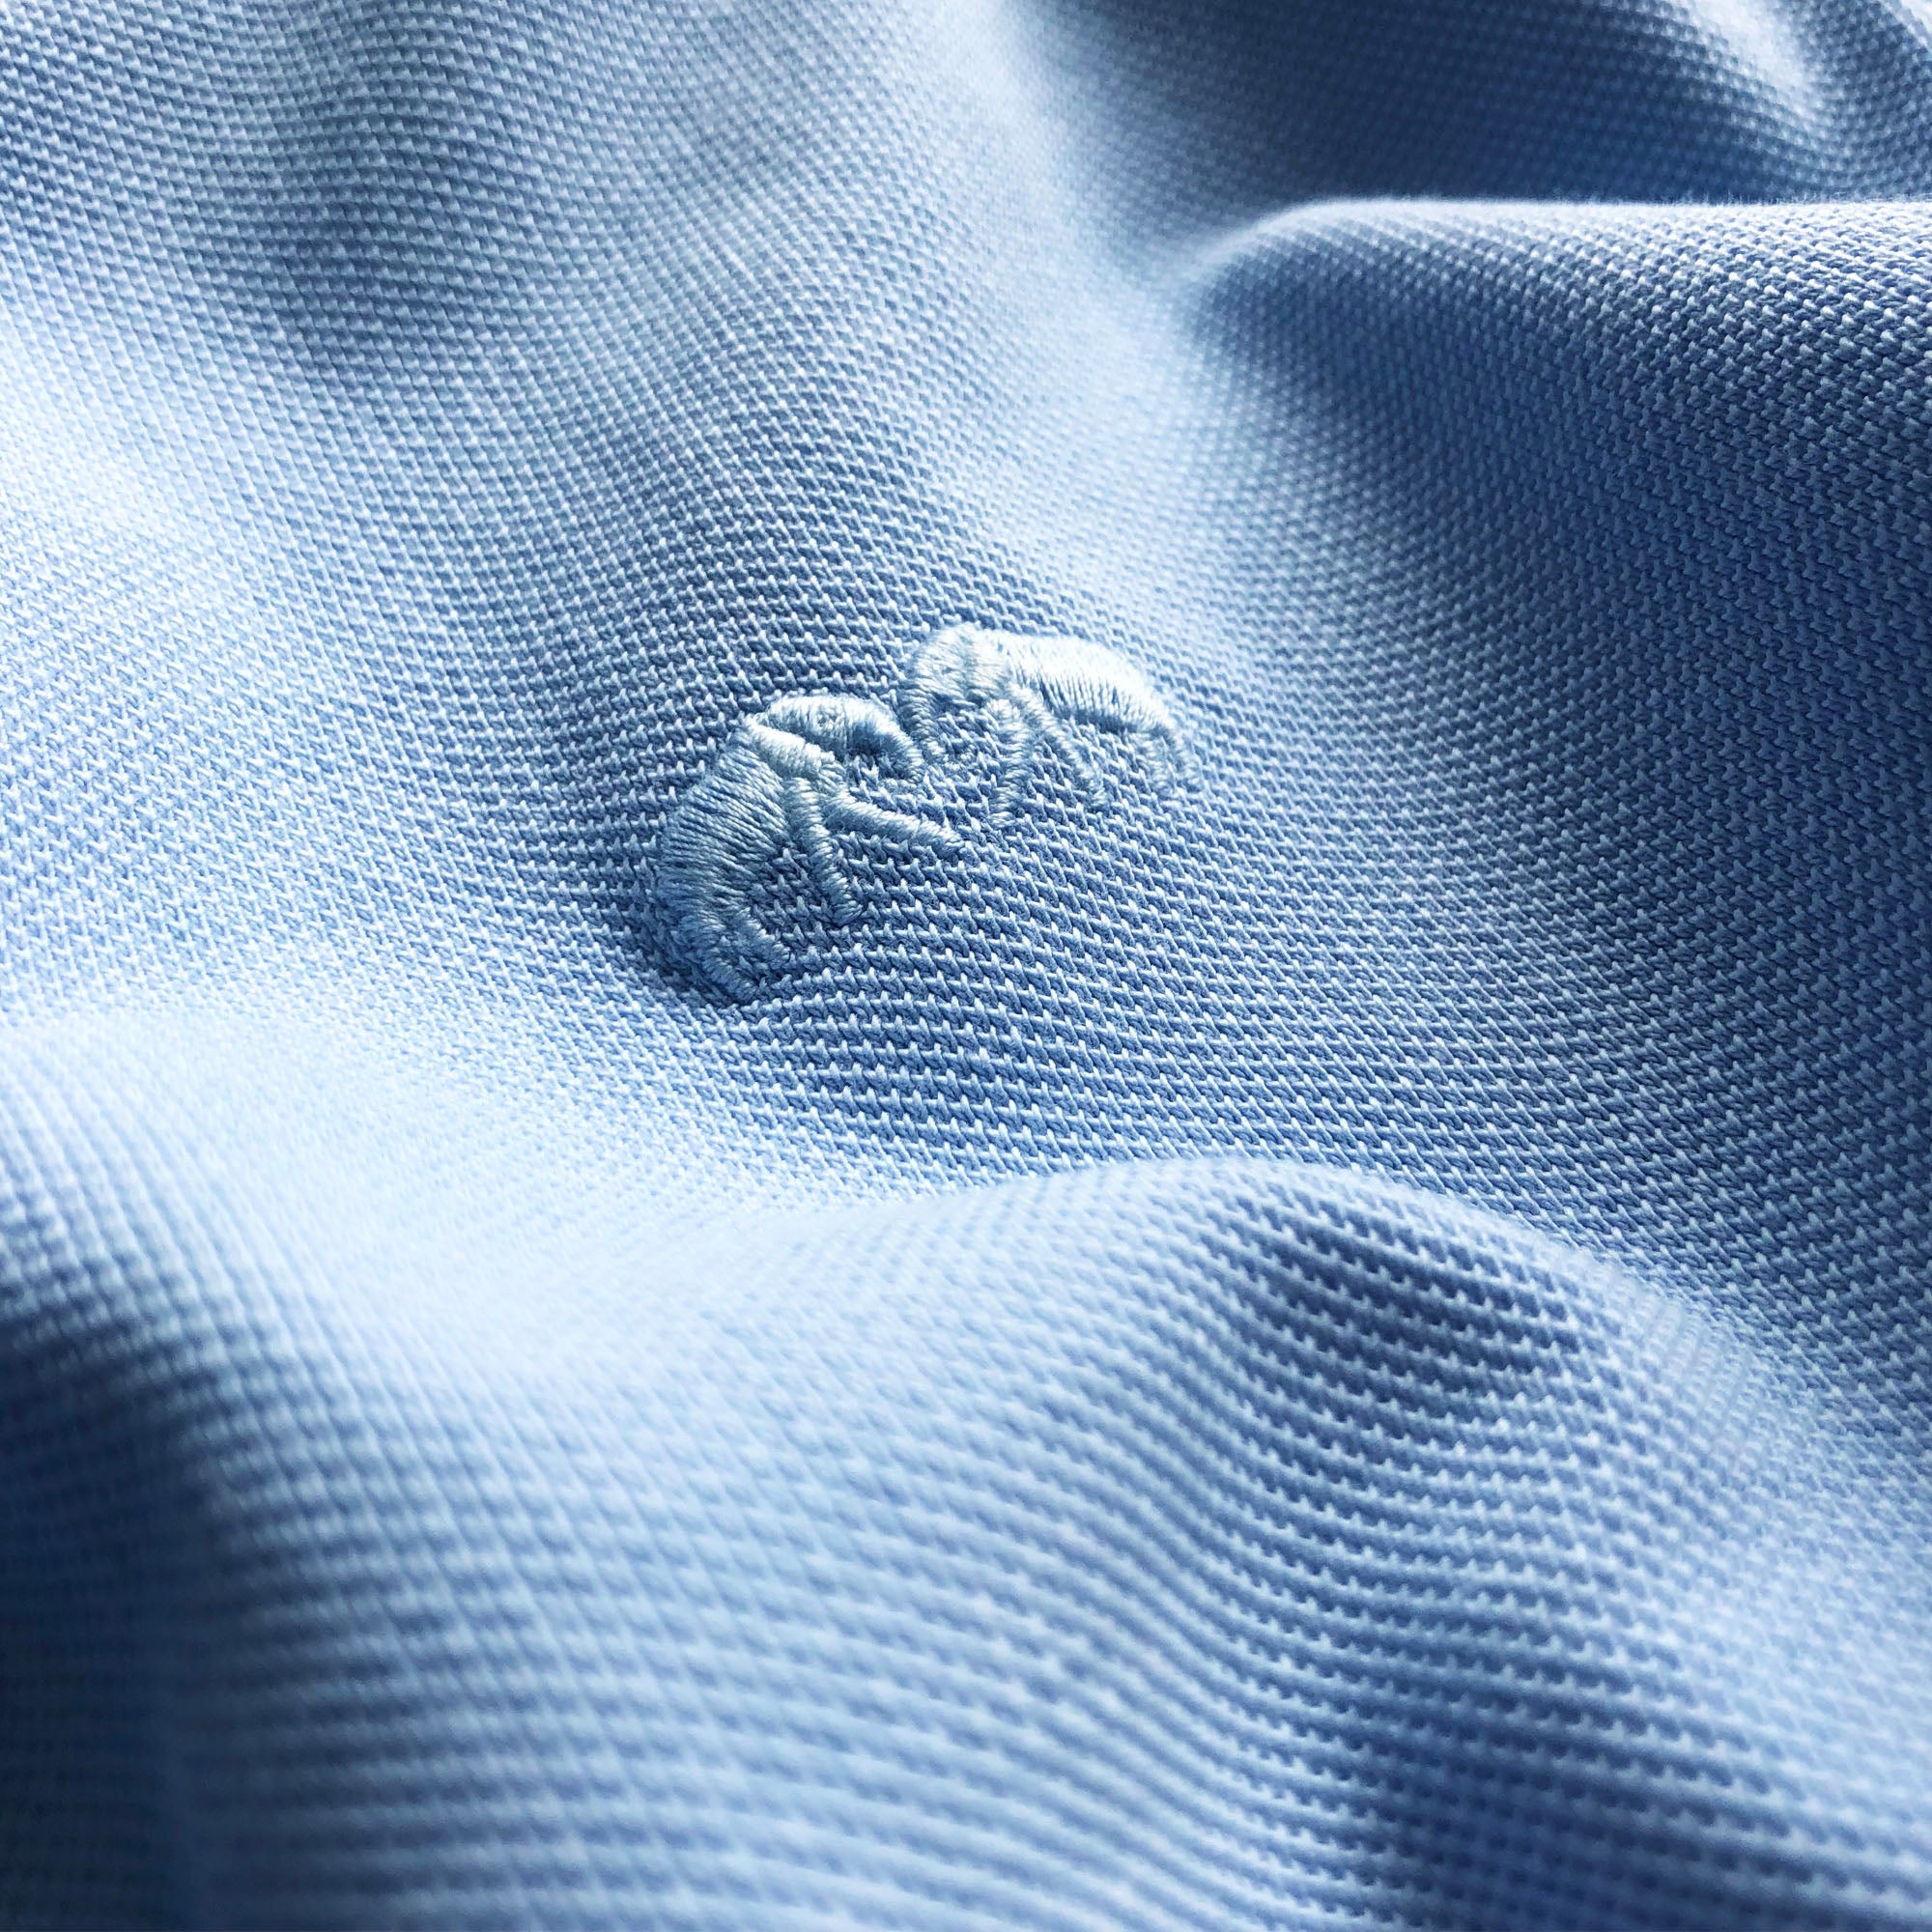 Men's Sky Blue Pensacola Polo Shirt fabric with embossed logo detail.